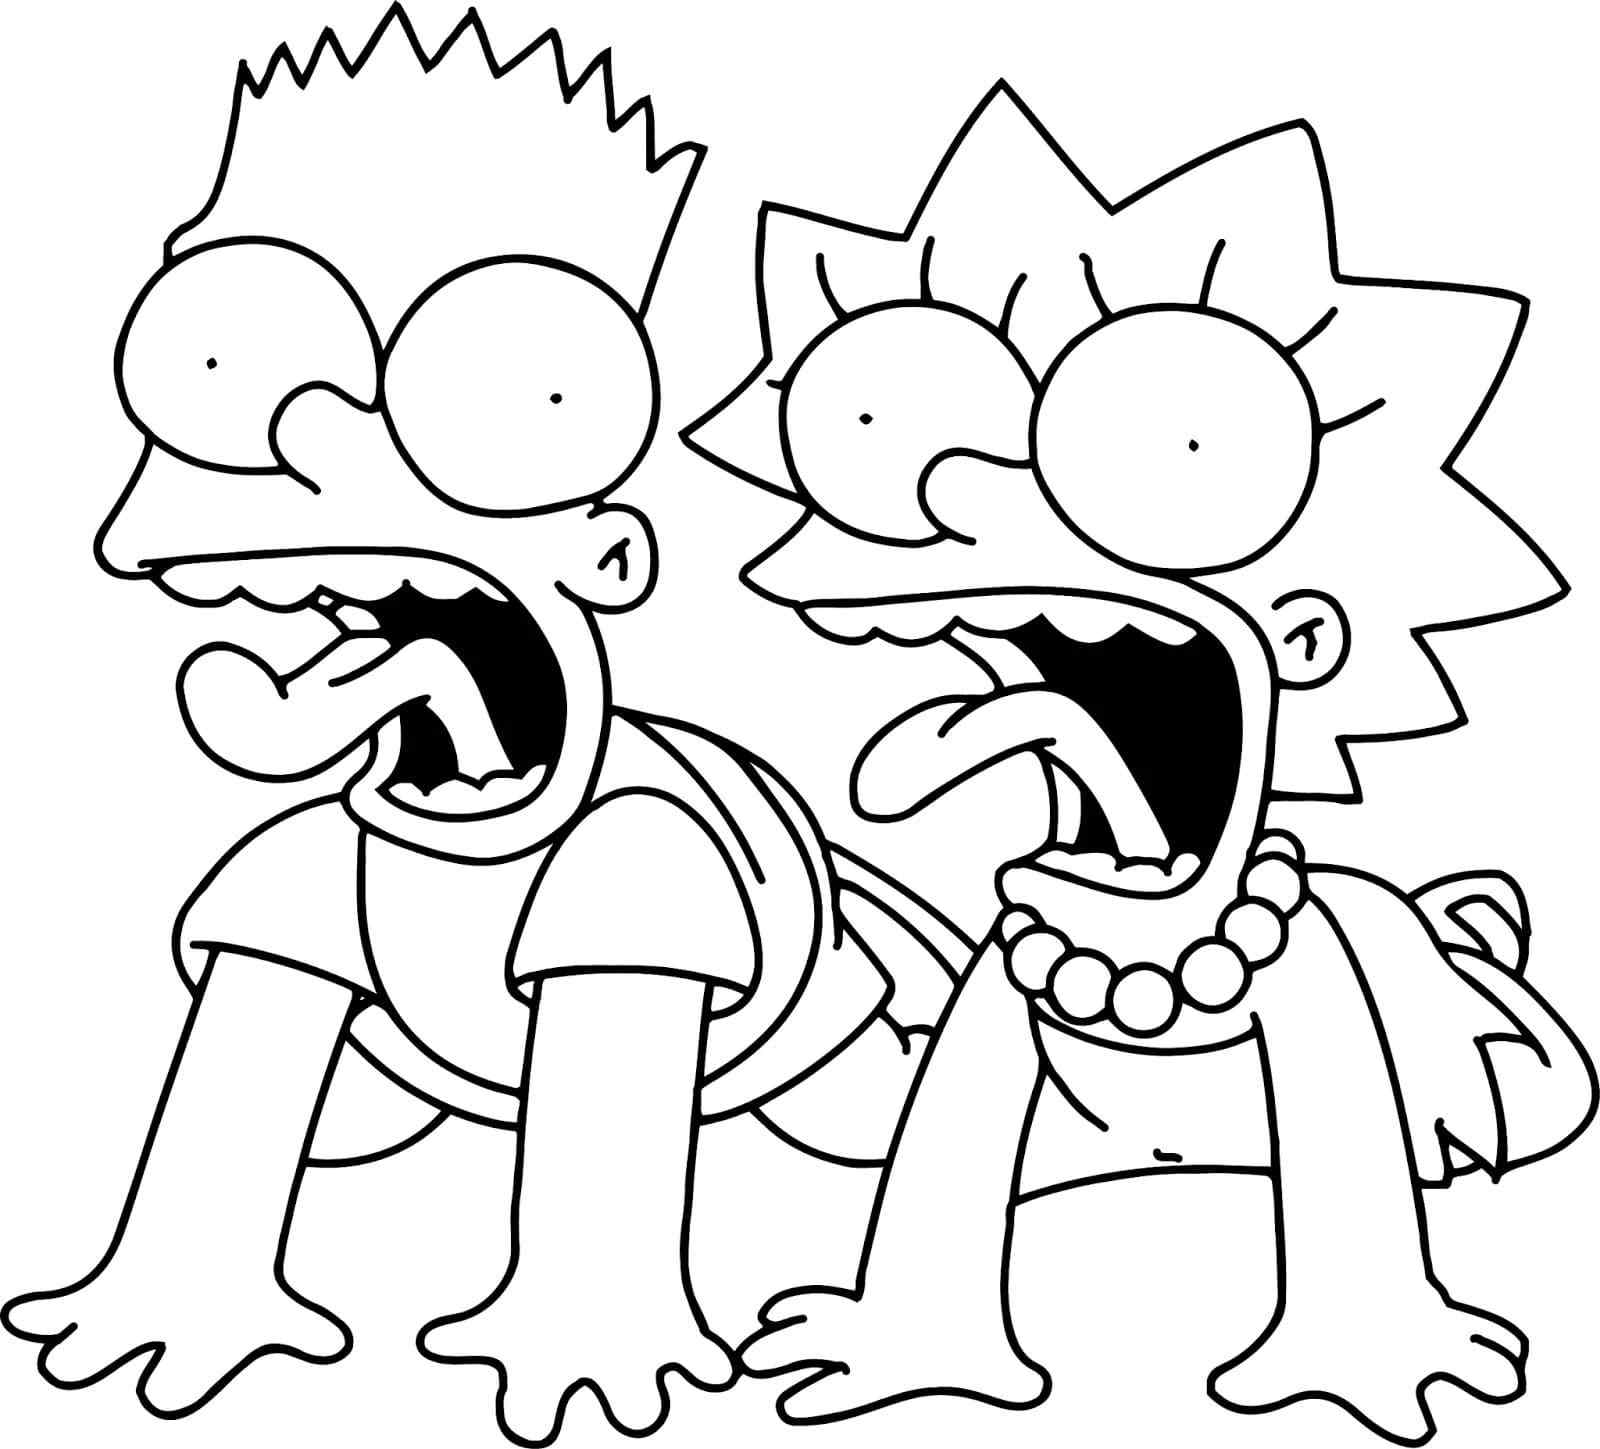 Children Scream With Fear Coloring Pages - Coloring Cool